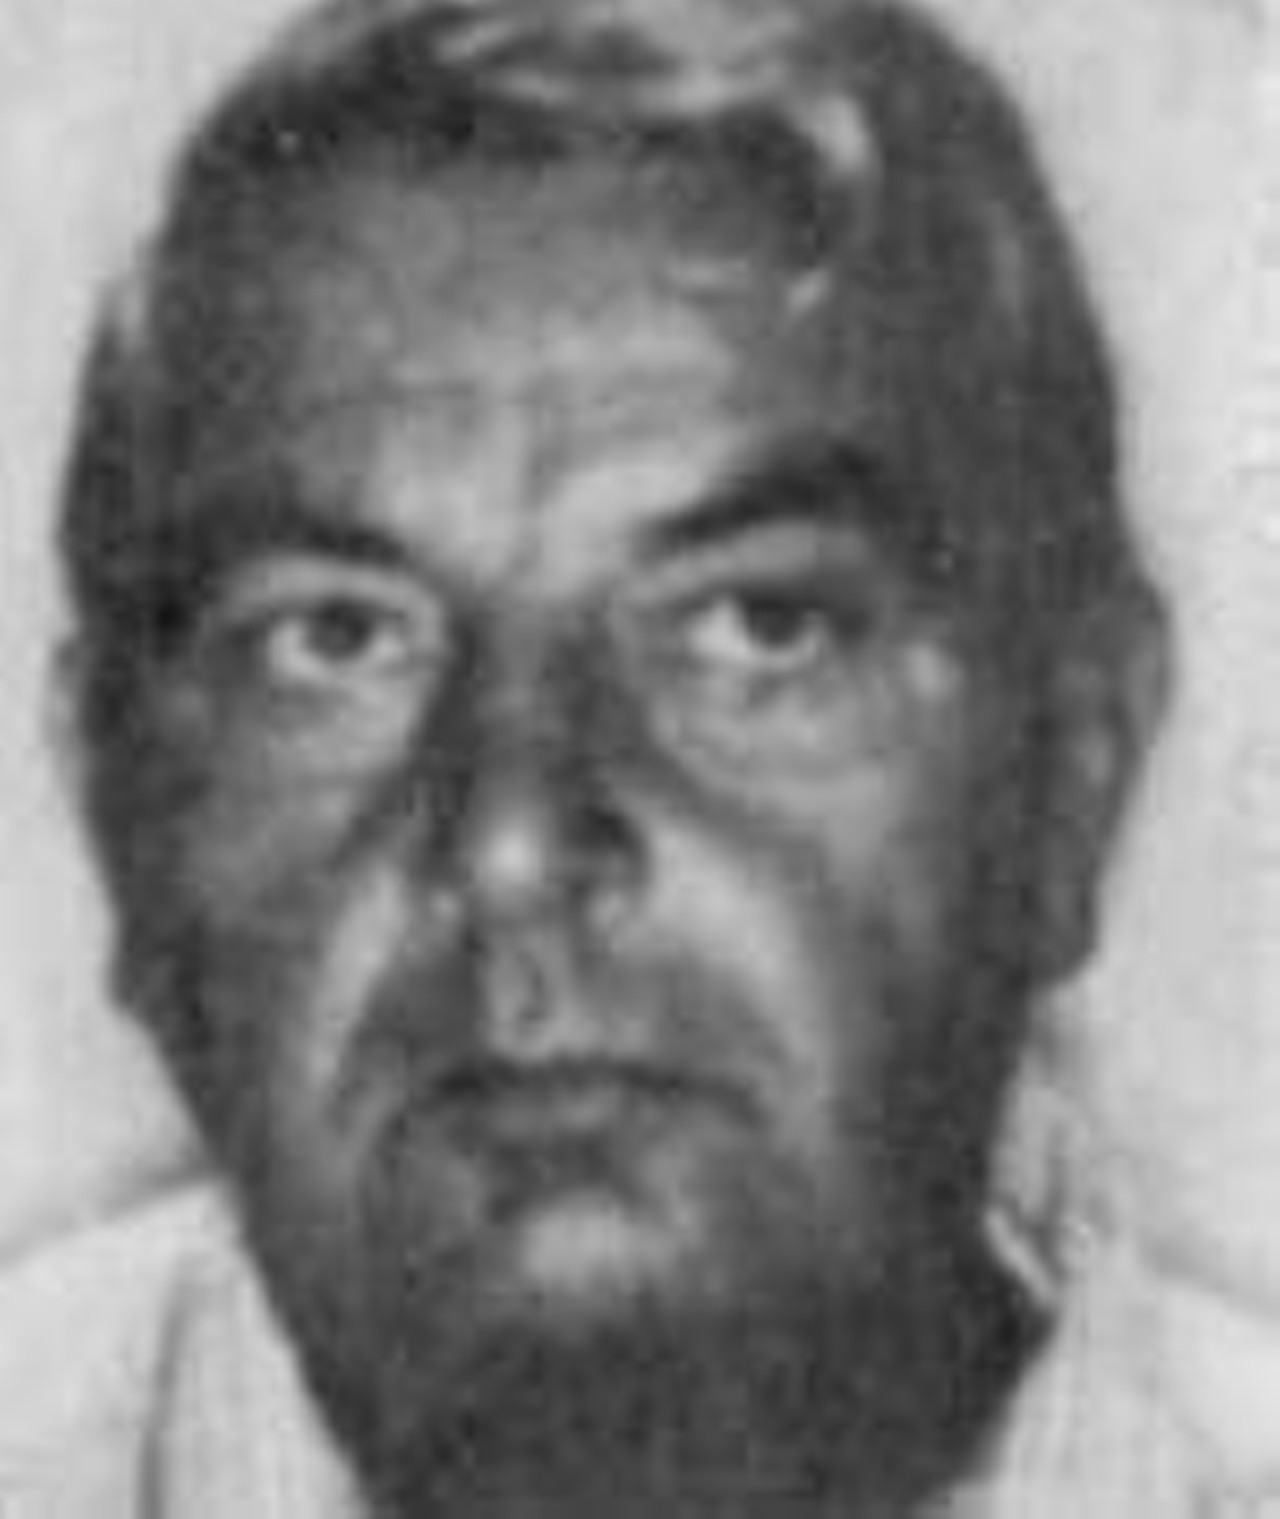 Anthony "Tony Dope" Delsanter - Anthony "Tony Dope" Delsanter served under Licavolli regime as the commander of Warren, OH rackets in the 1970s. Back in the 1940s-1950s Delsanter was working the Jungle Inn with Licavoli and crew in Akron, OH. Delsanter would plant the seeds for the murder of local Irish hoodlum and arch Licavolli enemy Danny Greene. His prompting would start a gangland war that would dismantle the Cleveland LCN Family. "Tony Dope" would die of natural causes in August 1977, serving as consigliere for a brief time.